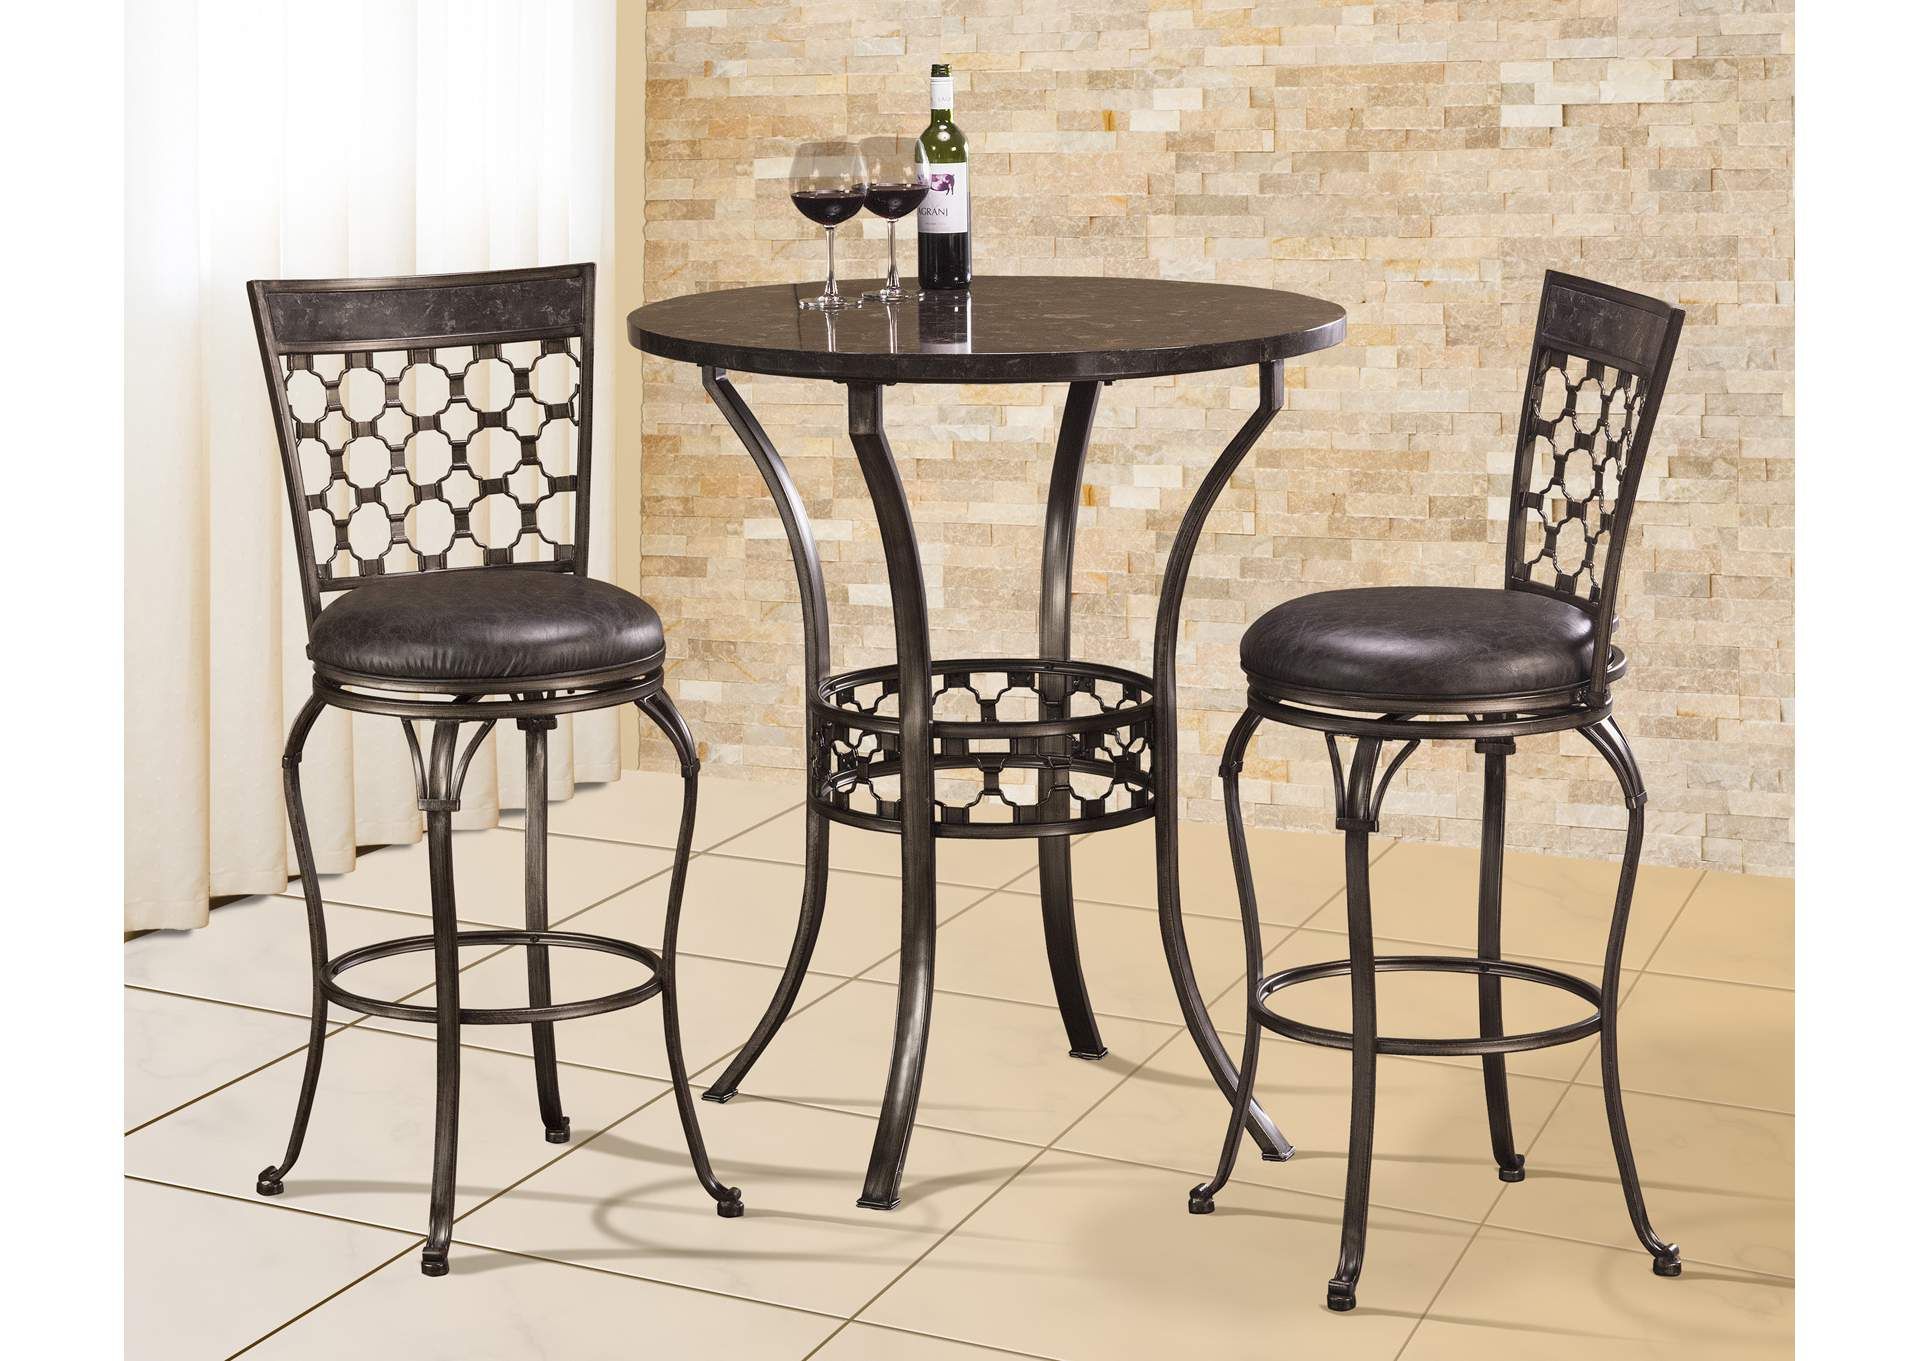 Brescello Pewter 3 Piece Bar Height Bistro Dining Set Kirk Imports Regarding 3 Piece Bistro Dining Sets (View 1 of 15)